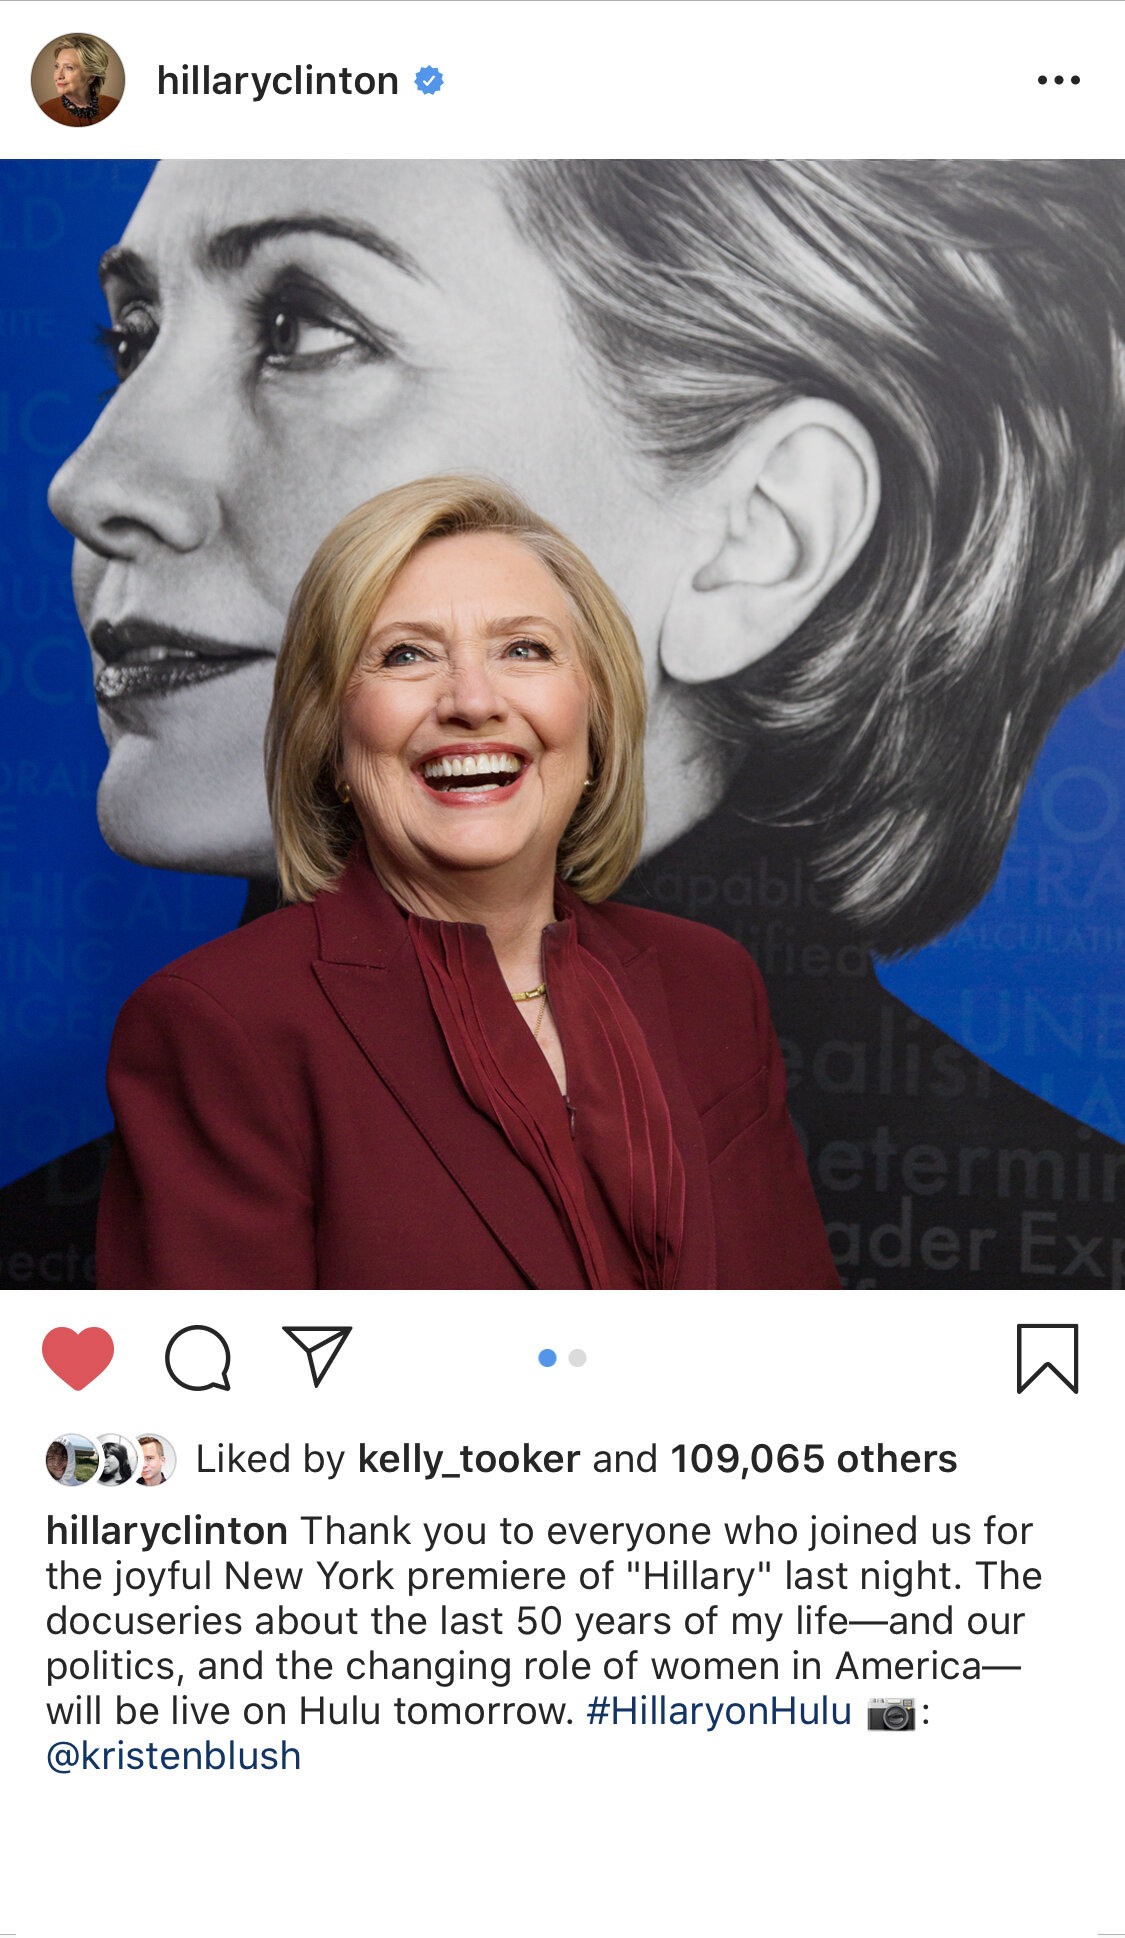  Secretary Hillary Clinton’s feature on Instagram, Twitter, and Facebook from the “Hillary” Hulu Premier, New York, NY 2019 